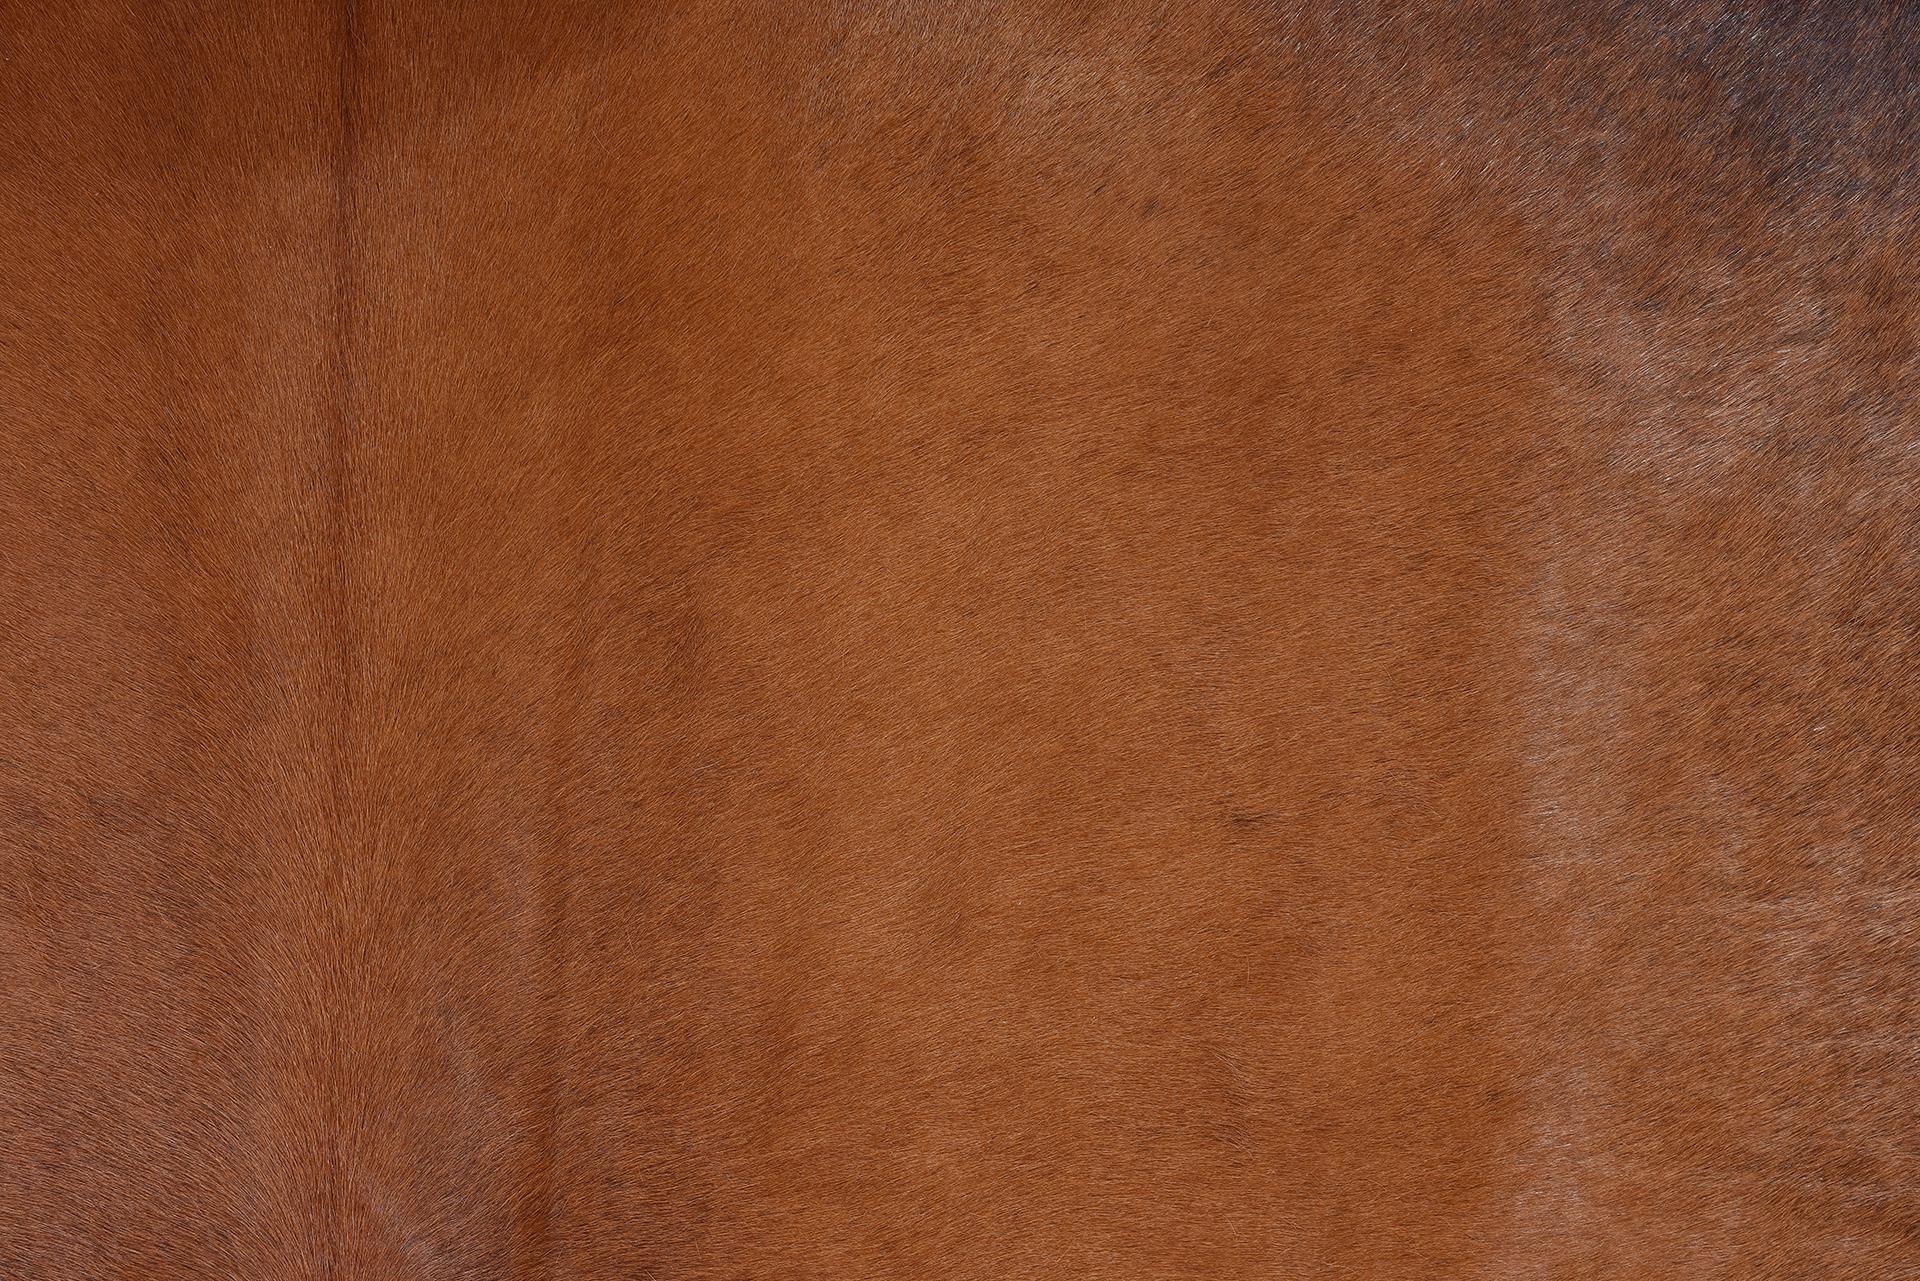 Brazilian Leather in Natural Color For Sale